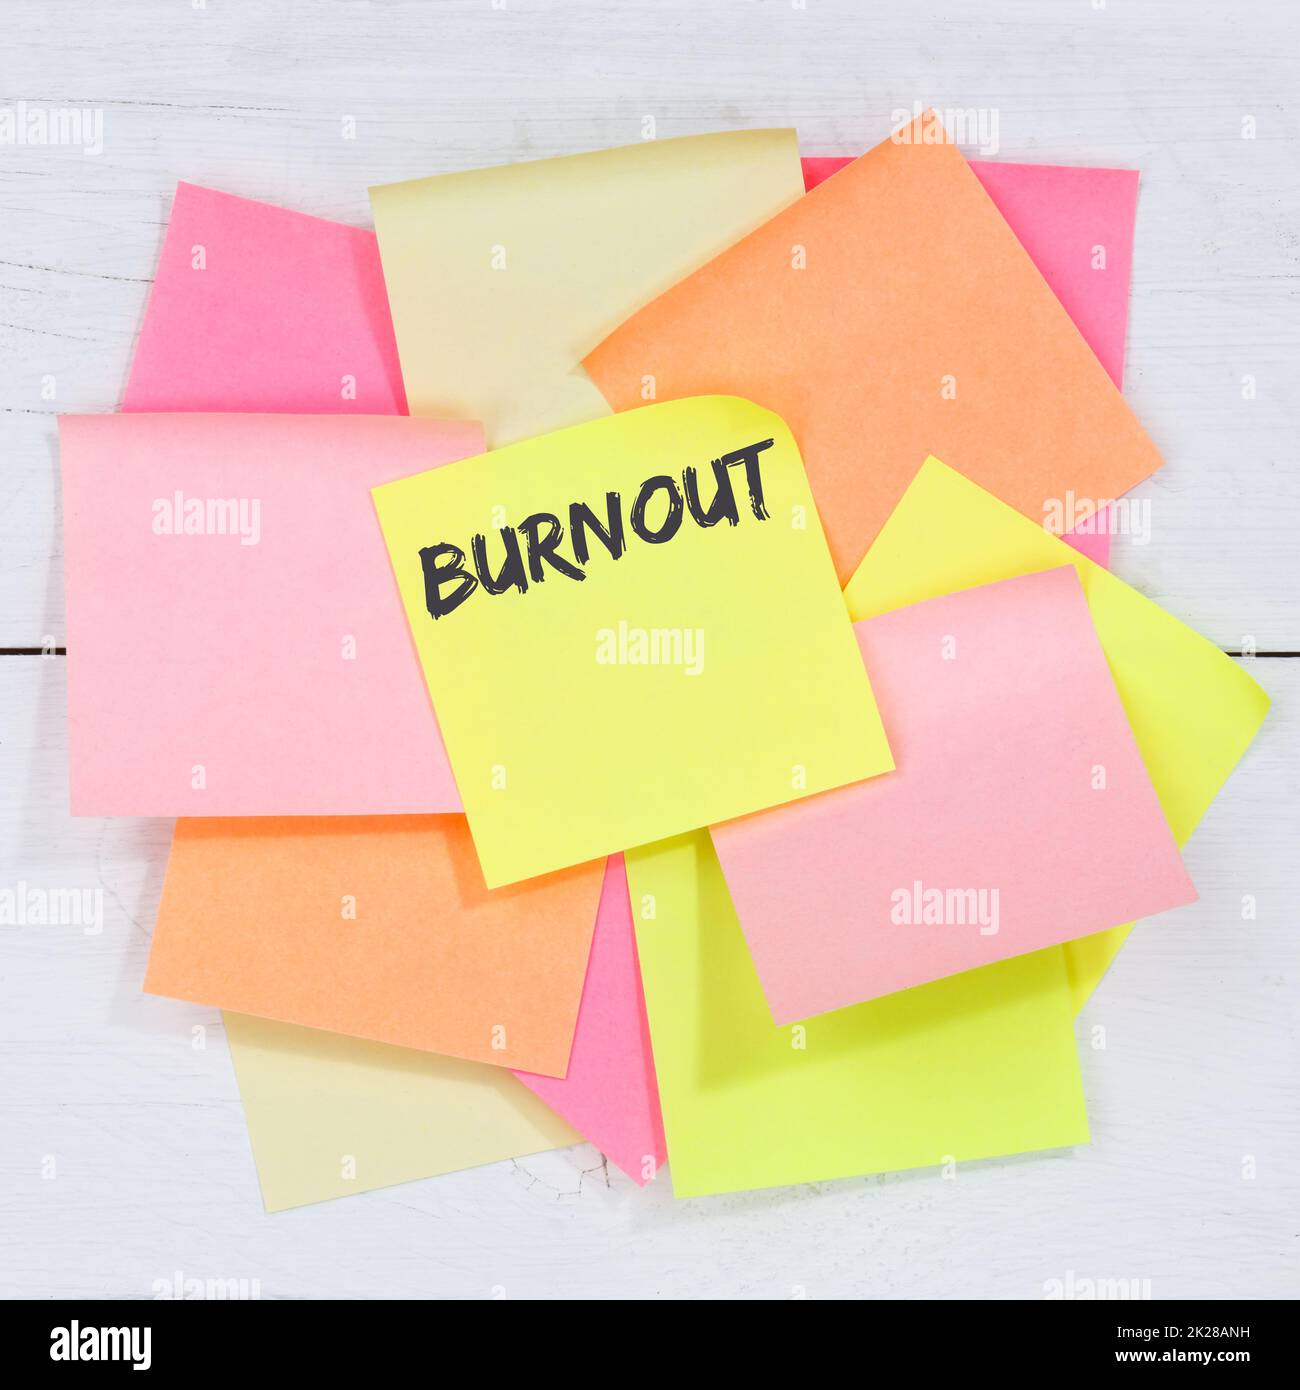 Burnout ill illness stress stressed at work business concept desk note paper Stock Photo